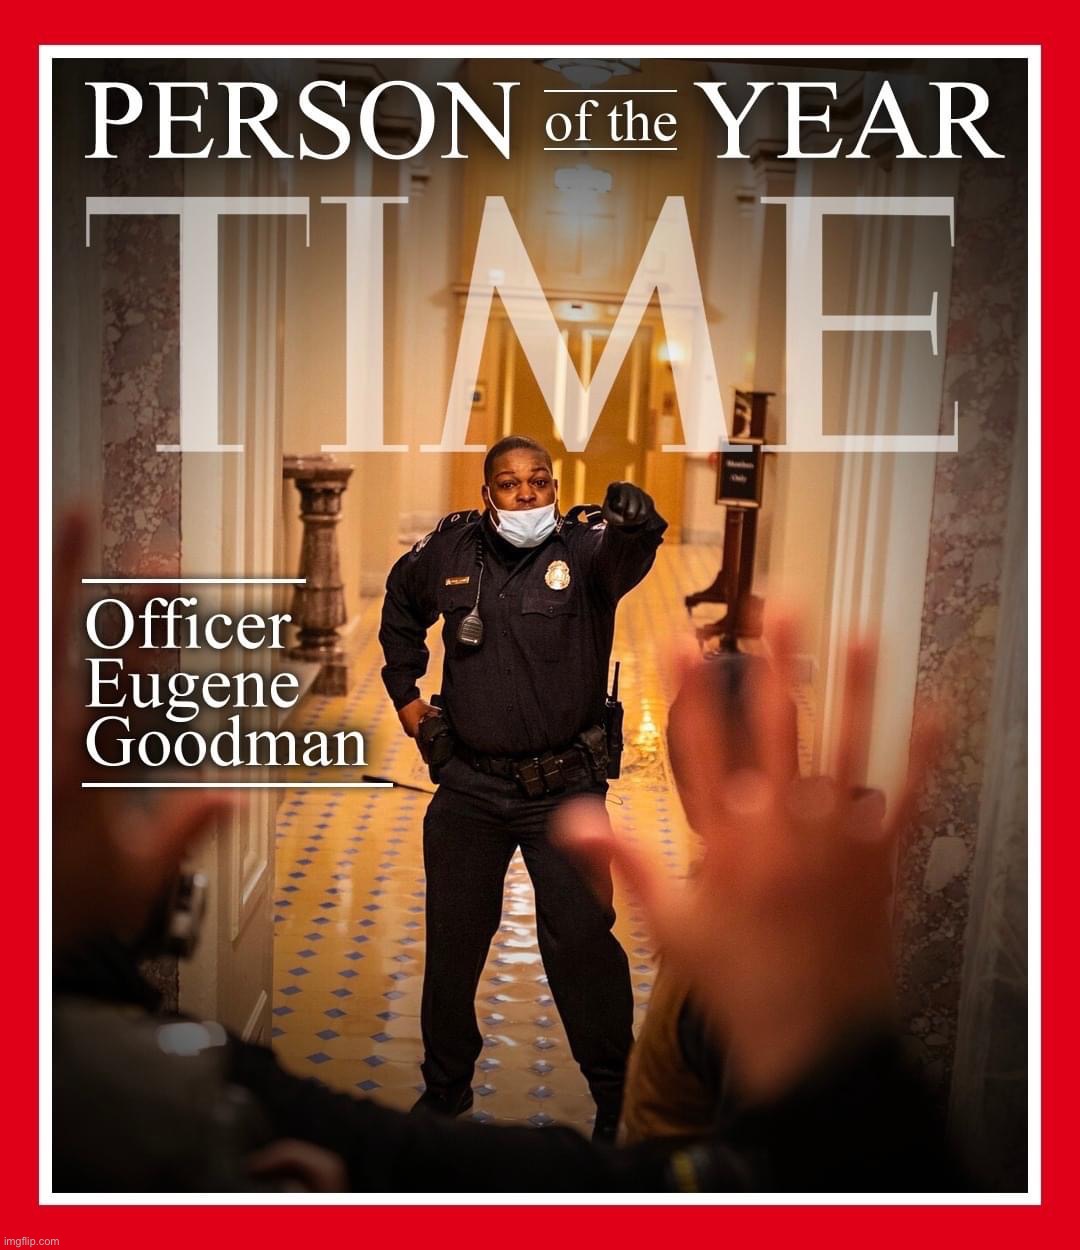 Fixed it for them :) | image tagged in officer eugene goodman person of the year 2021,time person of the year,time magazine person of the year | made w/ Imgflip meme maker